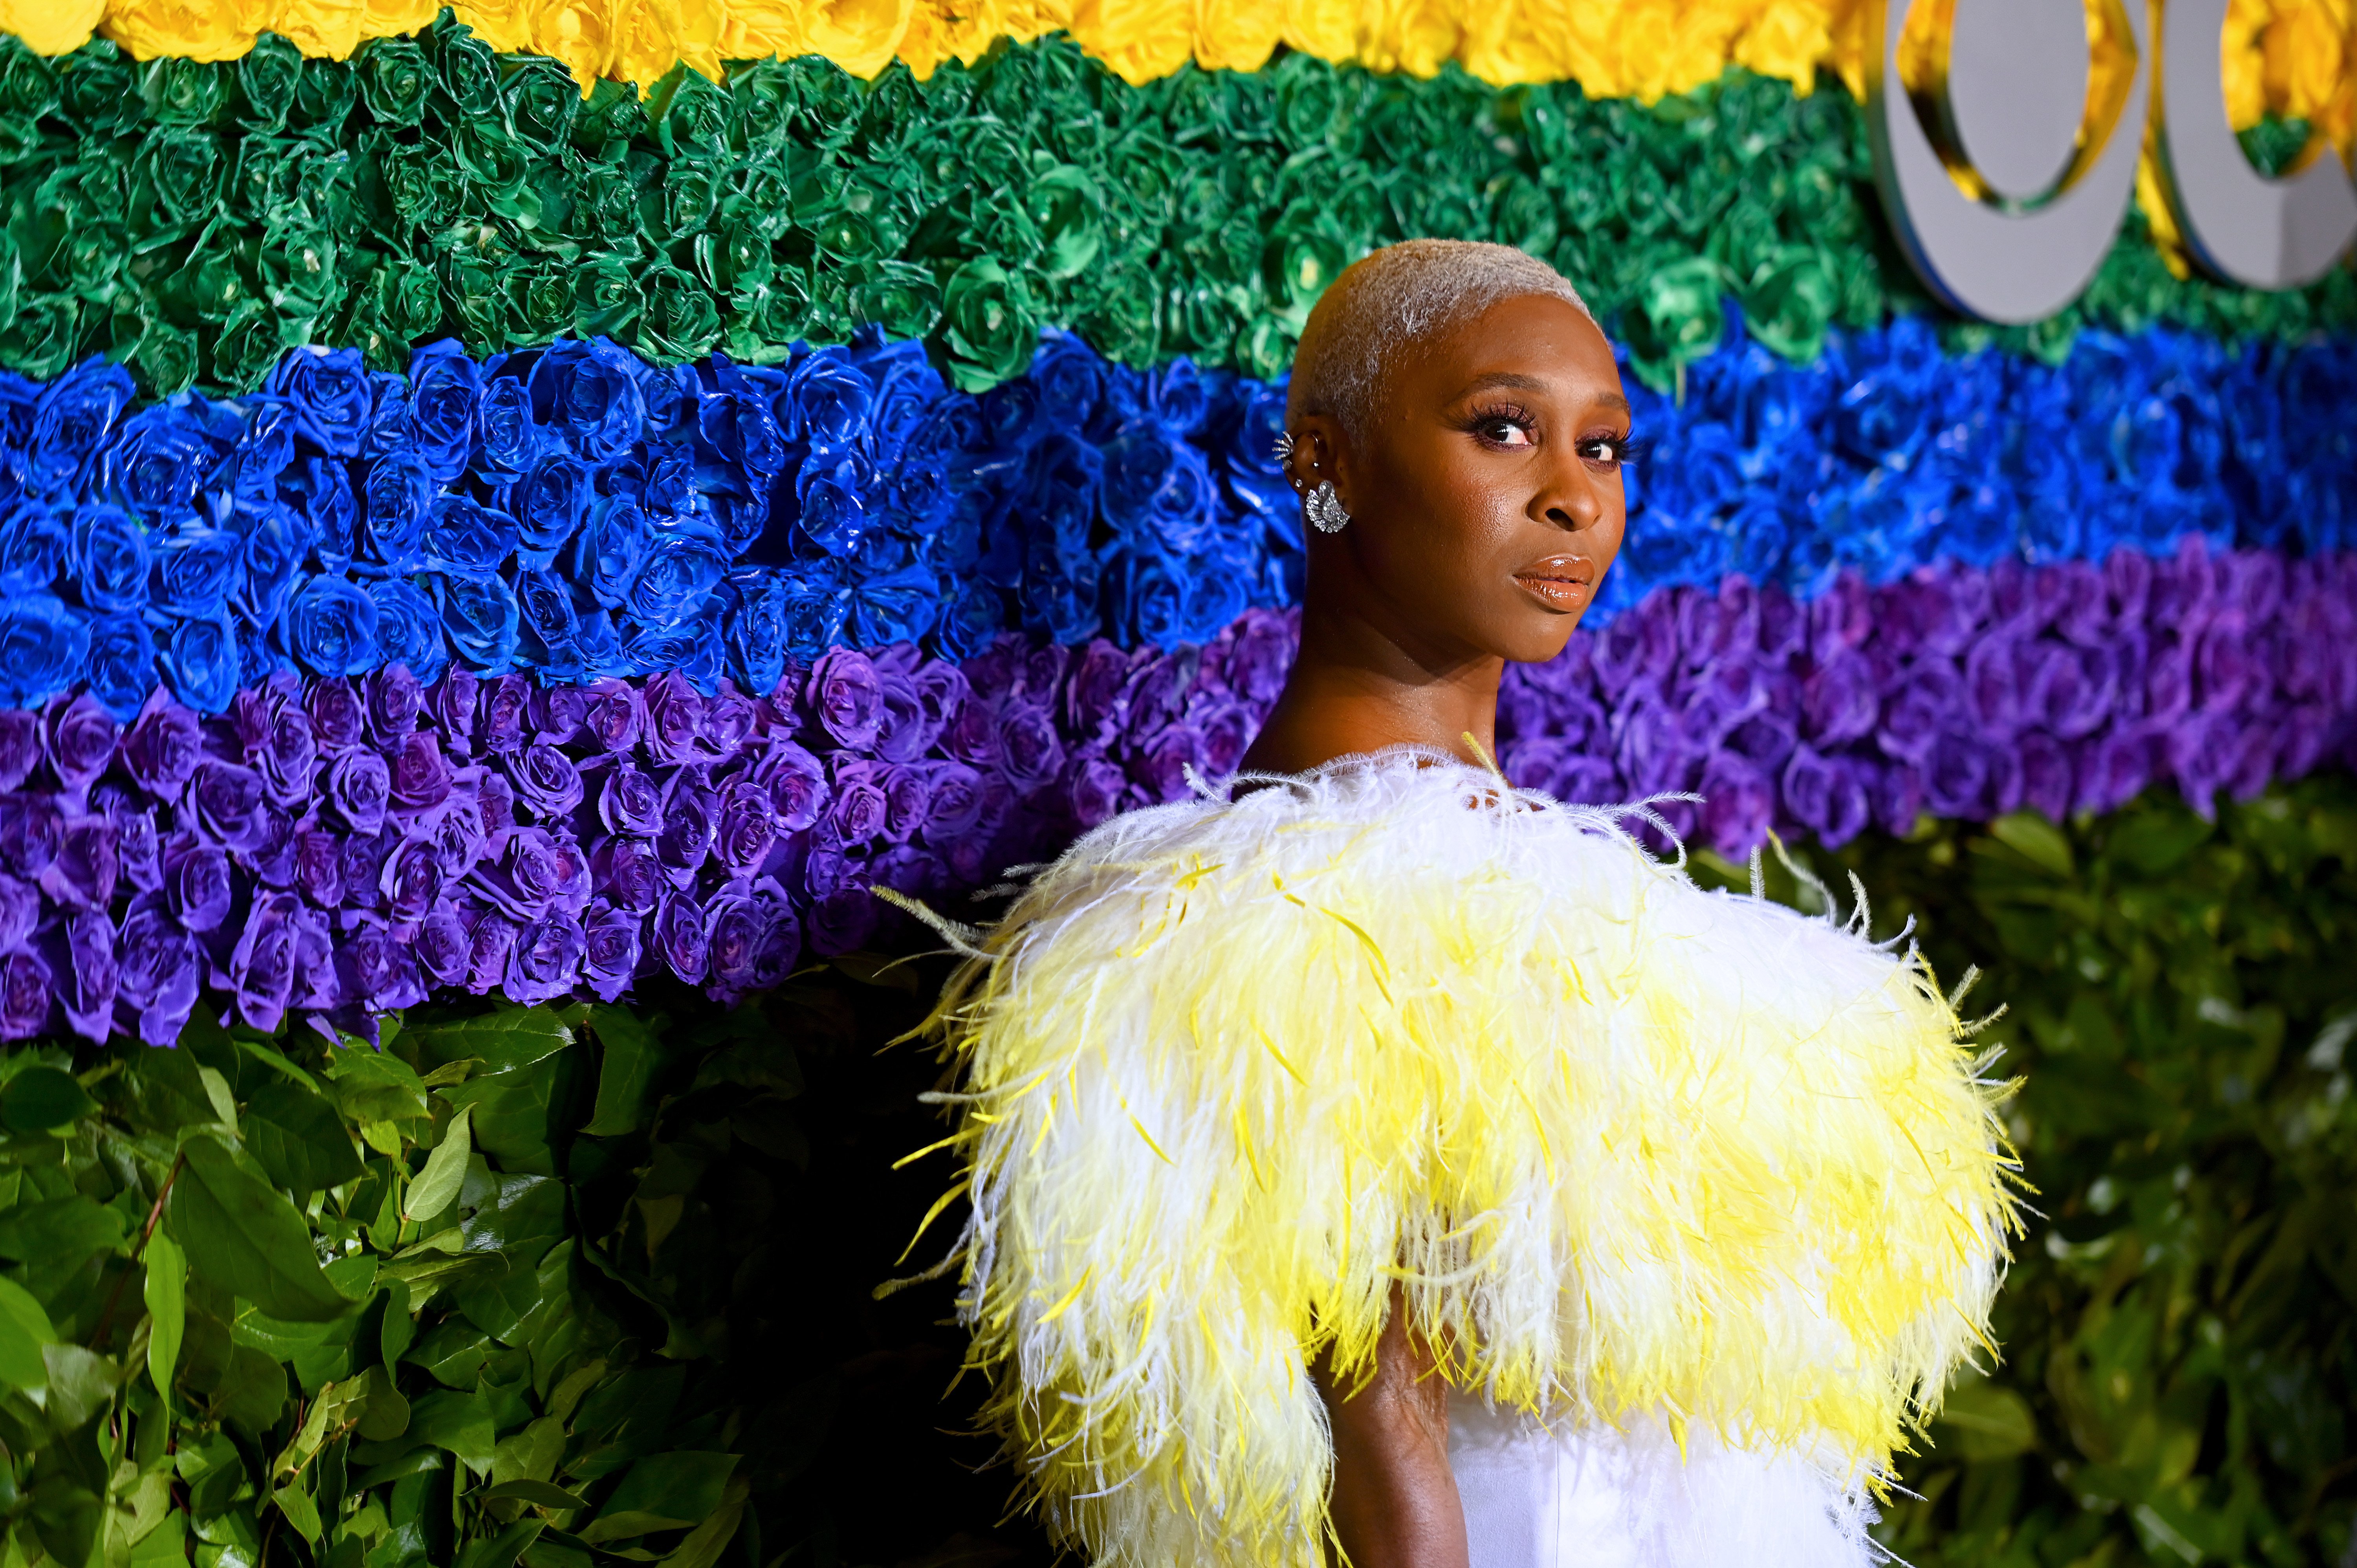 Cynthia Erivo at the 73rd Annual Tony Awards on June 09, 2019 in New York City | Photo: Getty Images